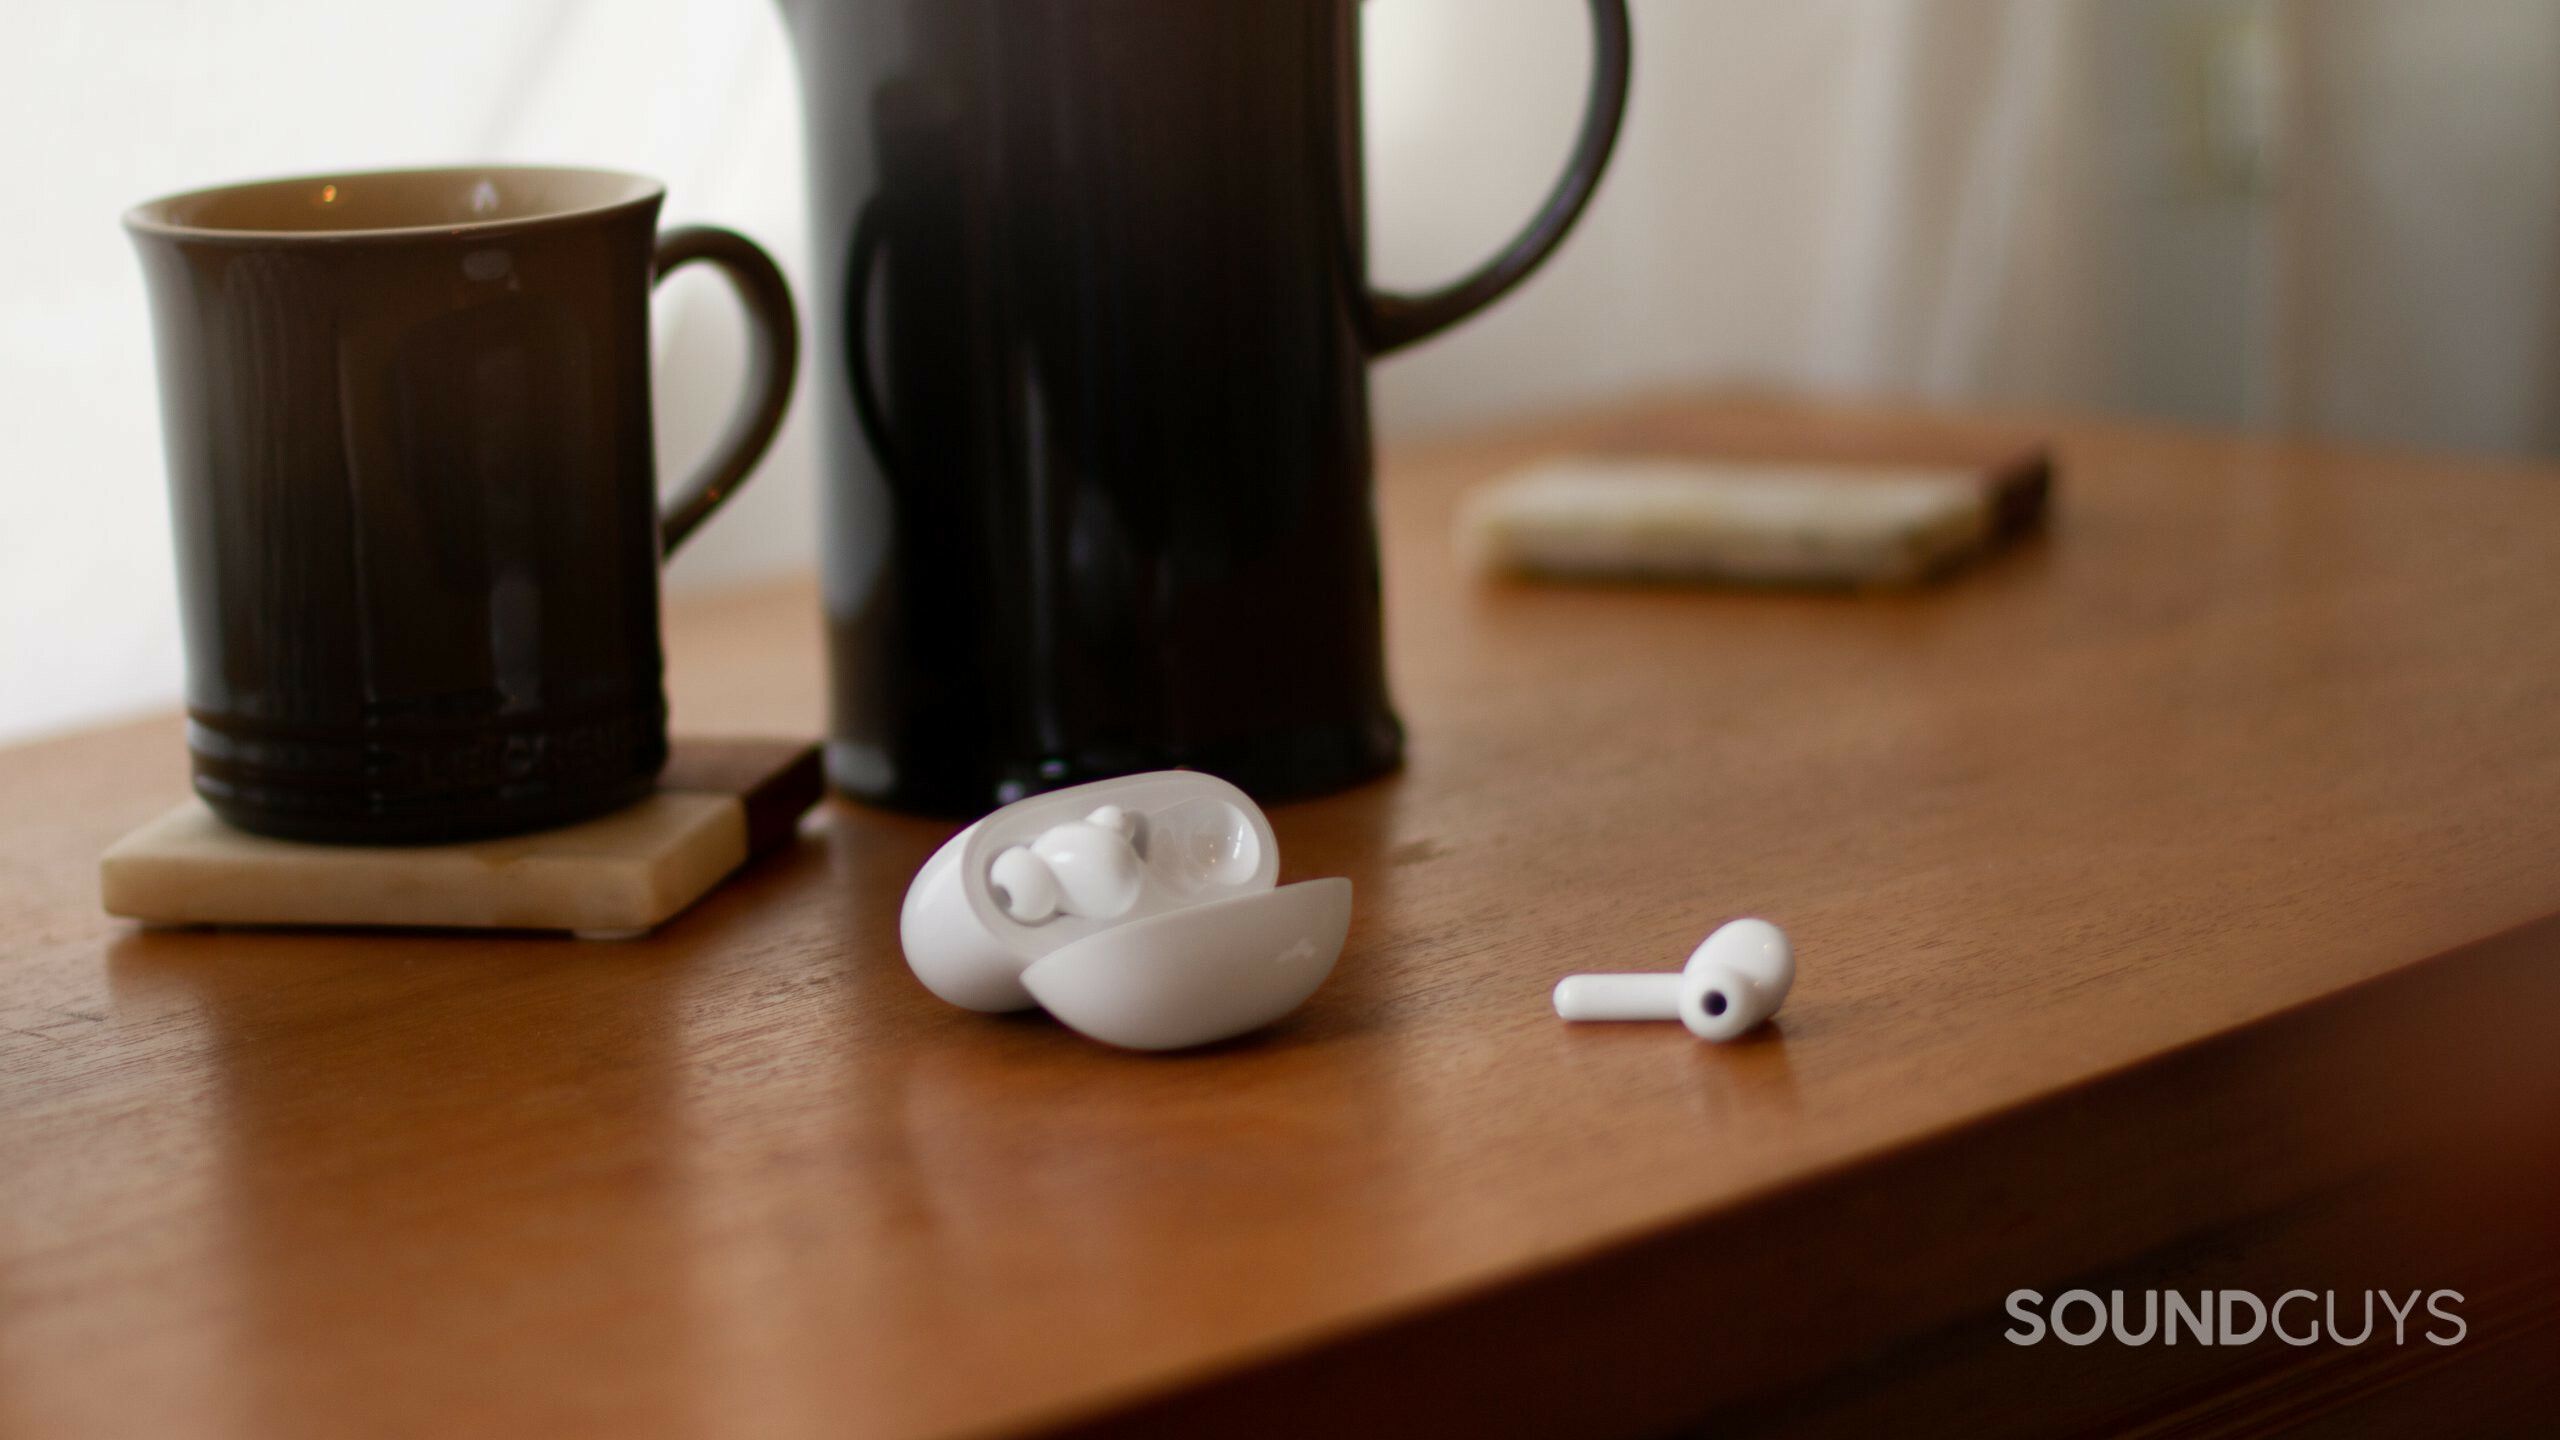 TCL MOVEAUDIO S600 case open with one earbud out on a wood table with a coffee mug.